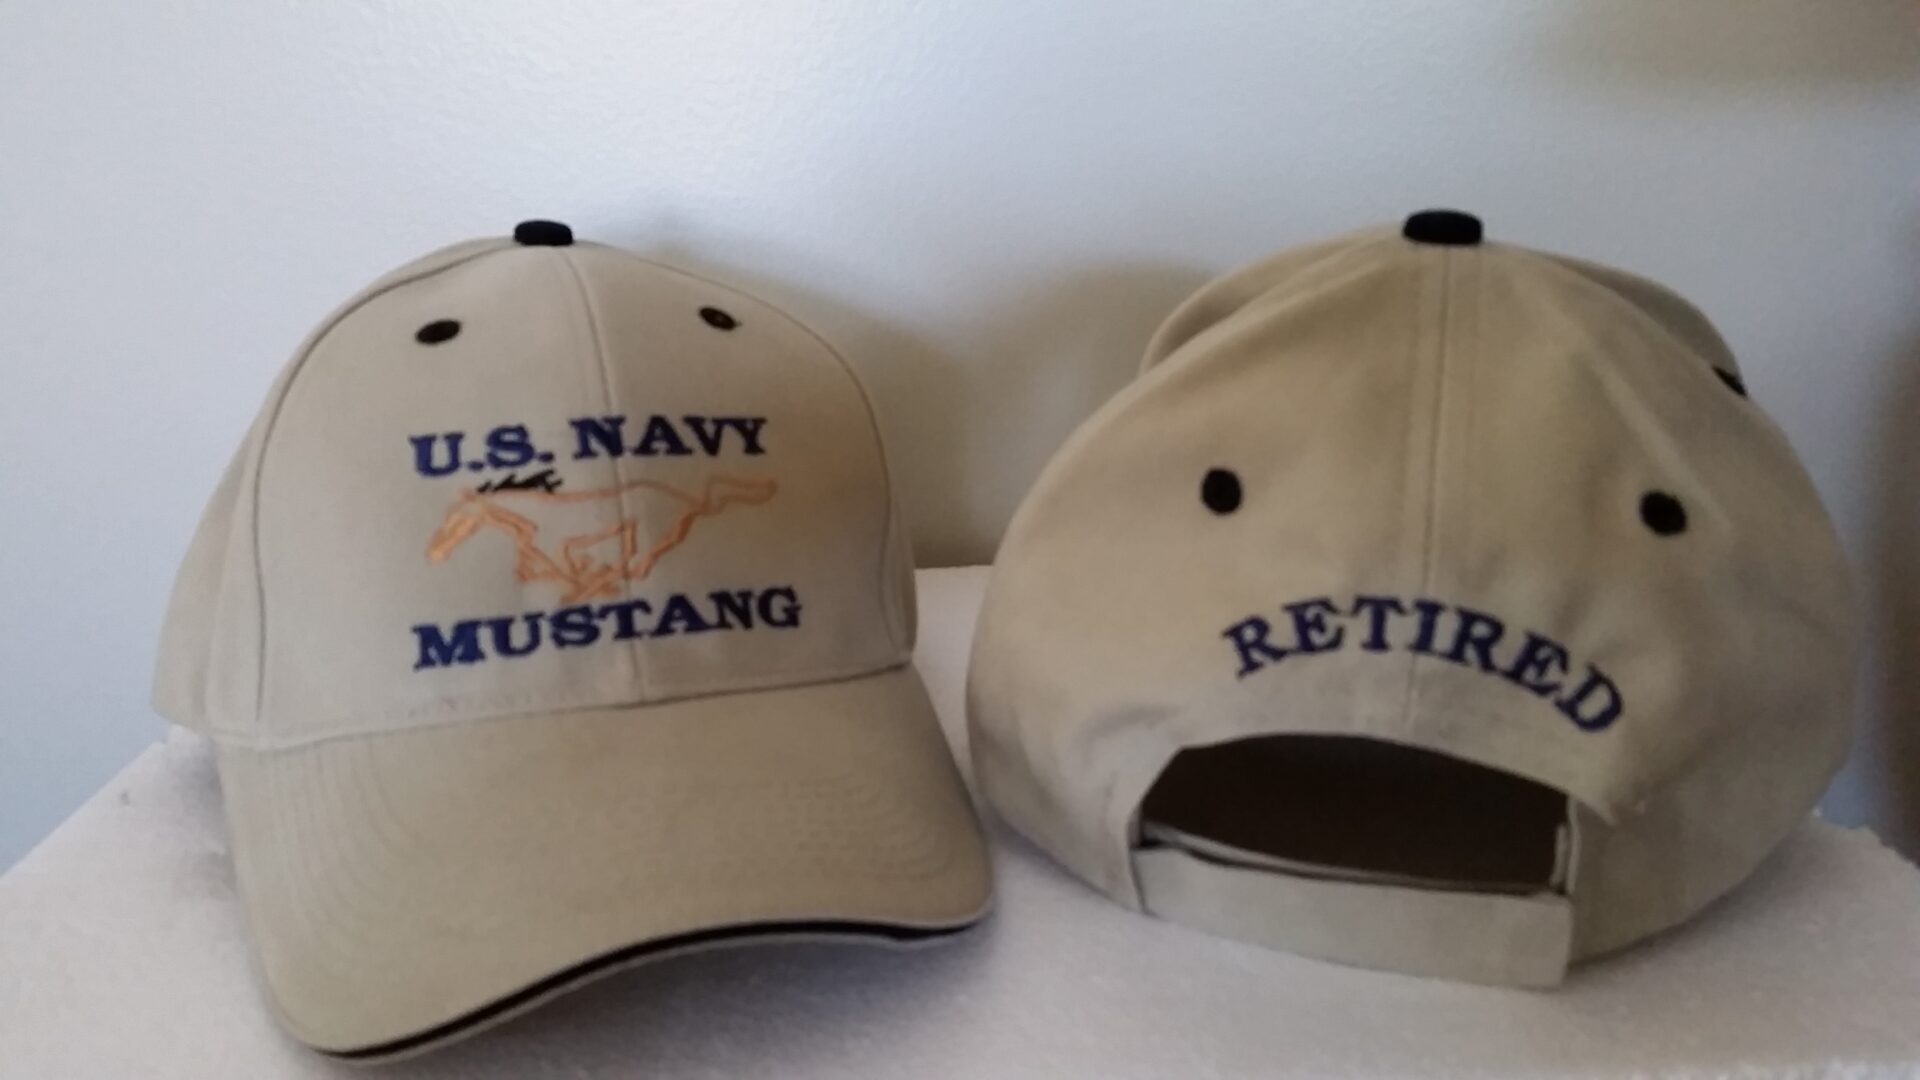 | BALL MUSTANG CAPS The Navy Mustang NAVY Store